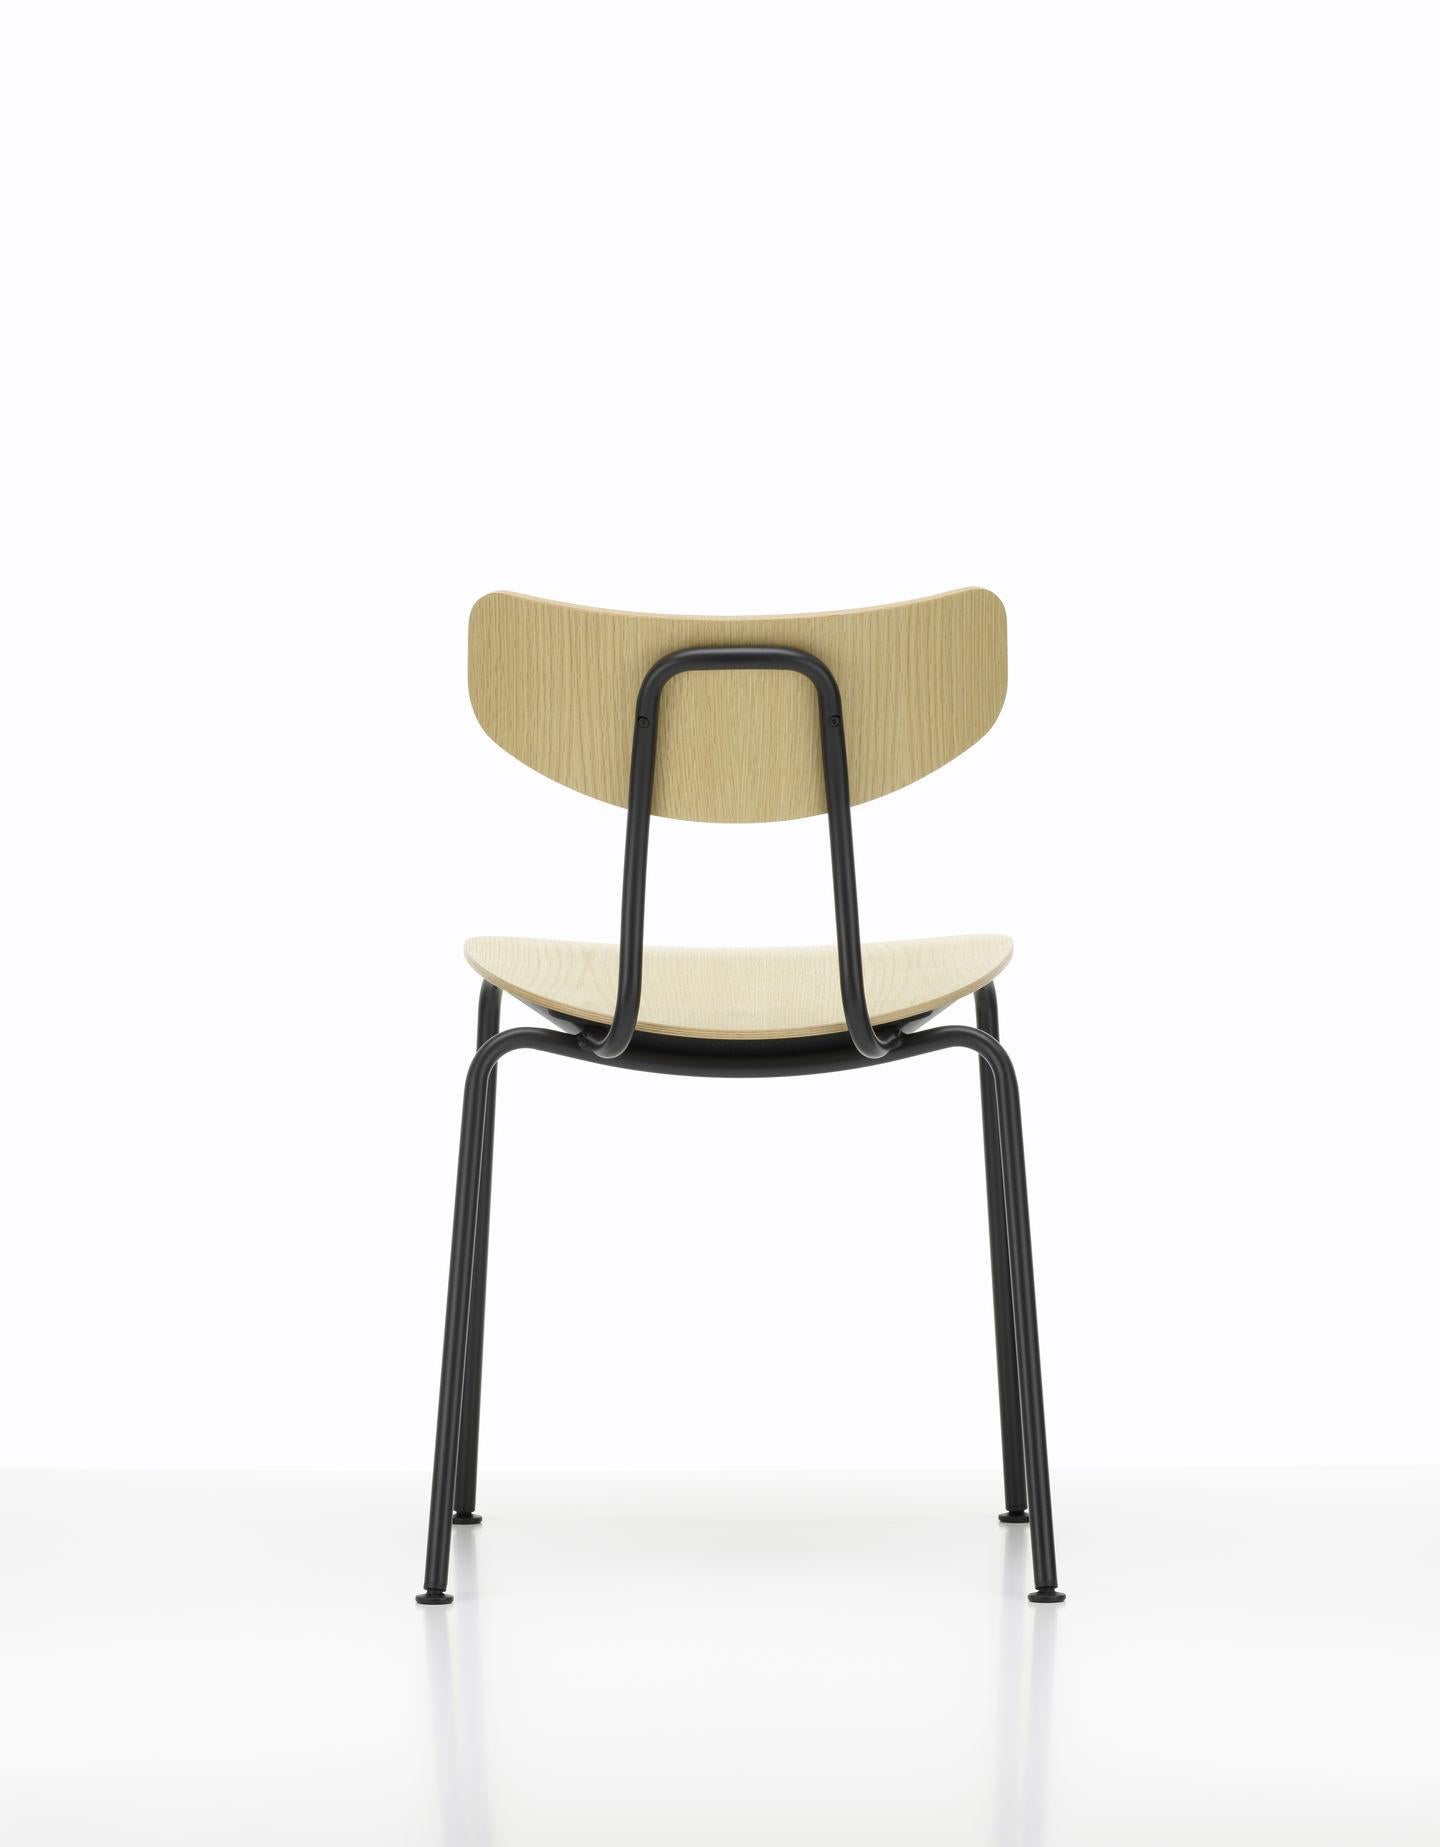 Set of Six Moca Chairs in Plywood and Metal Designed by Jasper Morrison 2